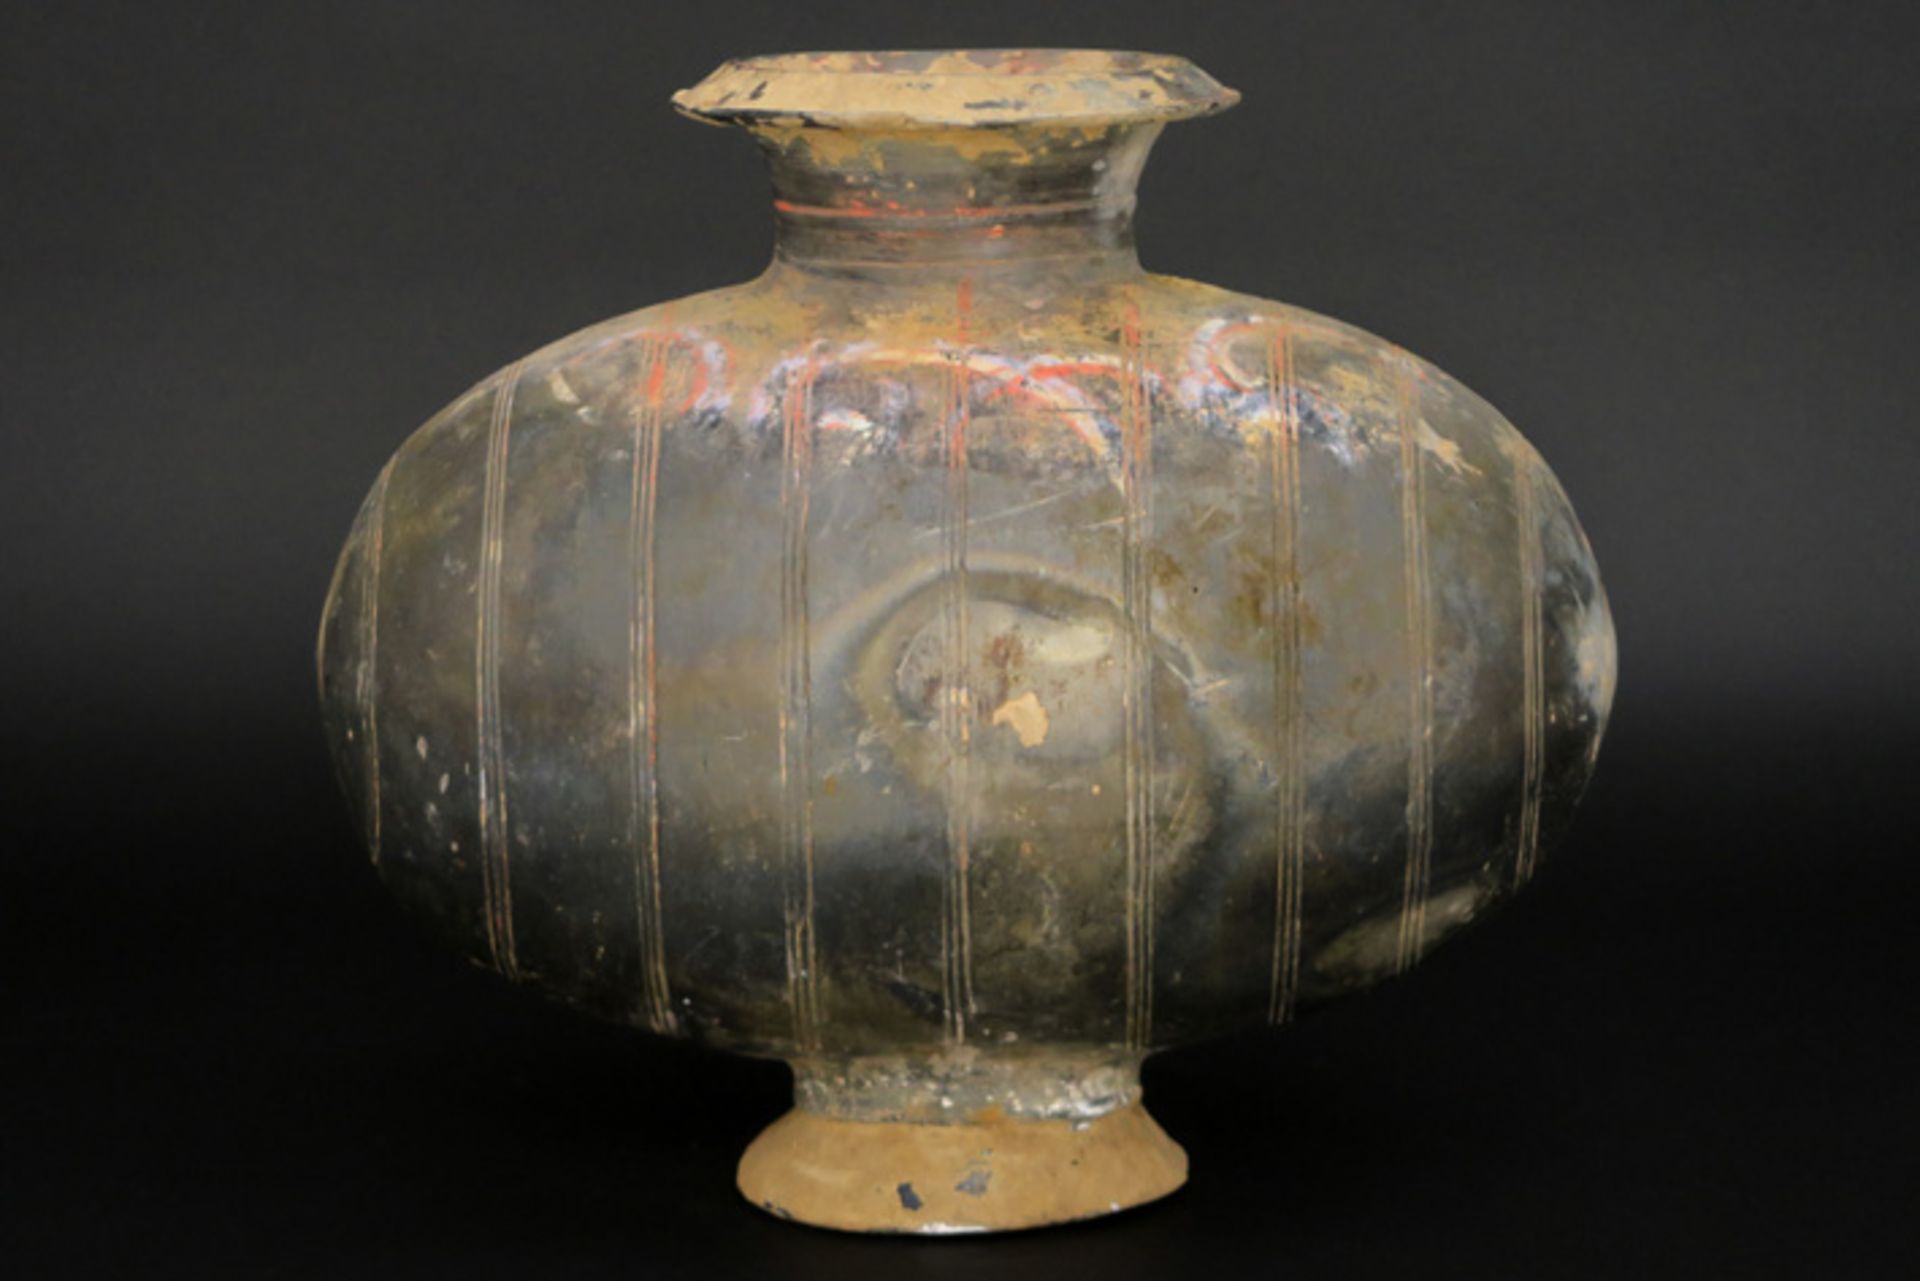 Chinese Han period tomb find : a cocoon vase in earthenware with original polychromy||CHINA - HAN-